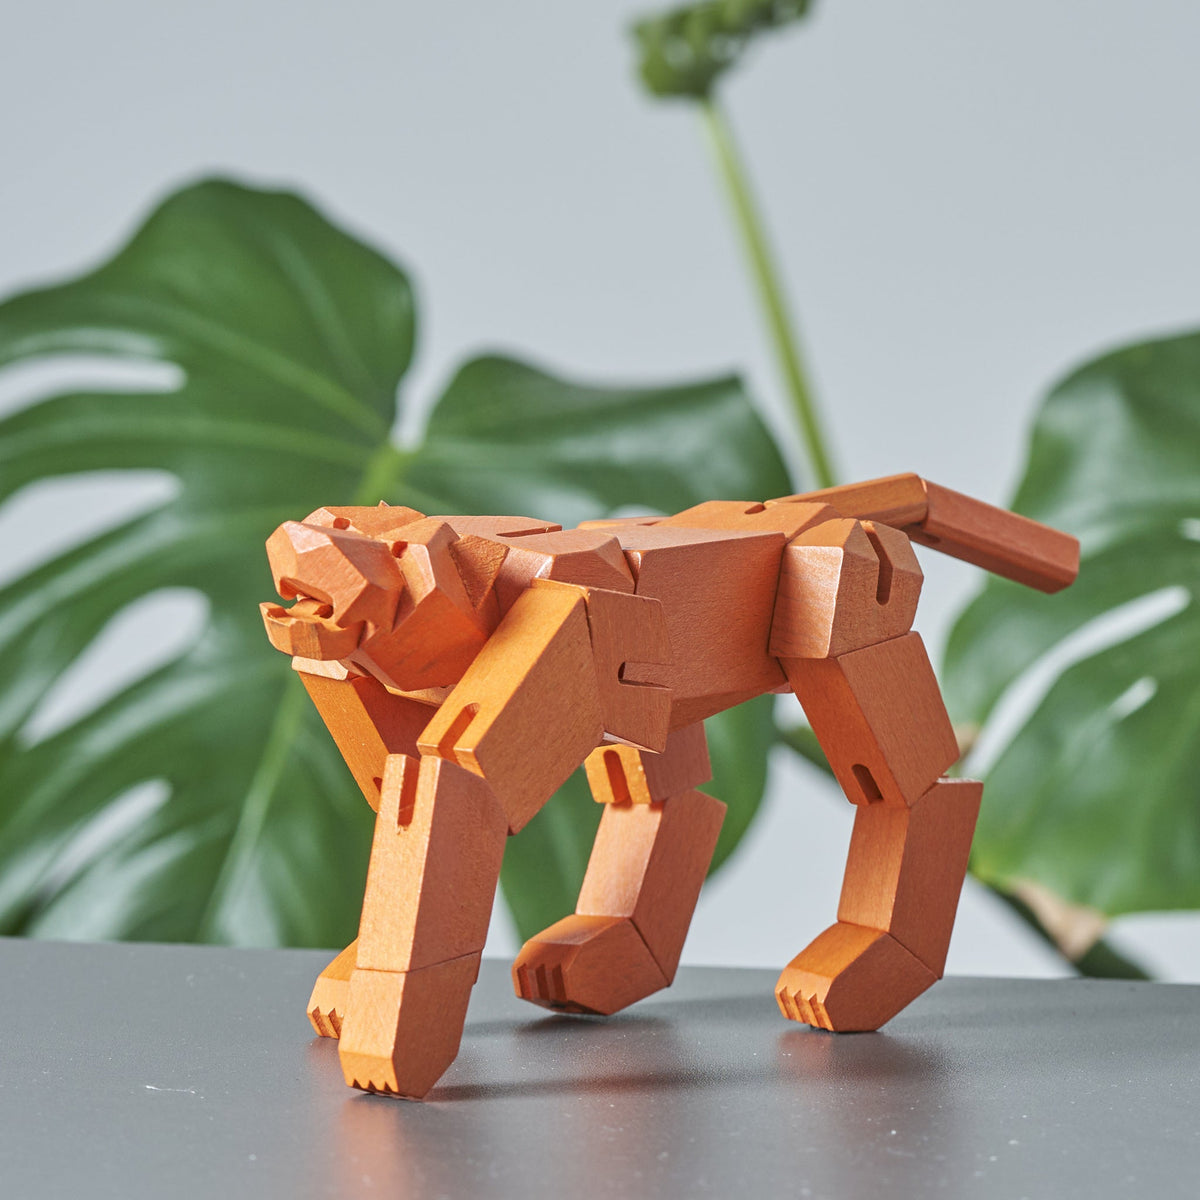 Morphits ® Tiger Wooden Toy: Roaring Adventures Await in our Wooden Playset - Yoshiaki Ito Design Stand O5